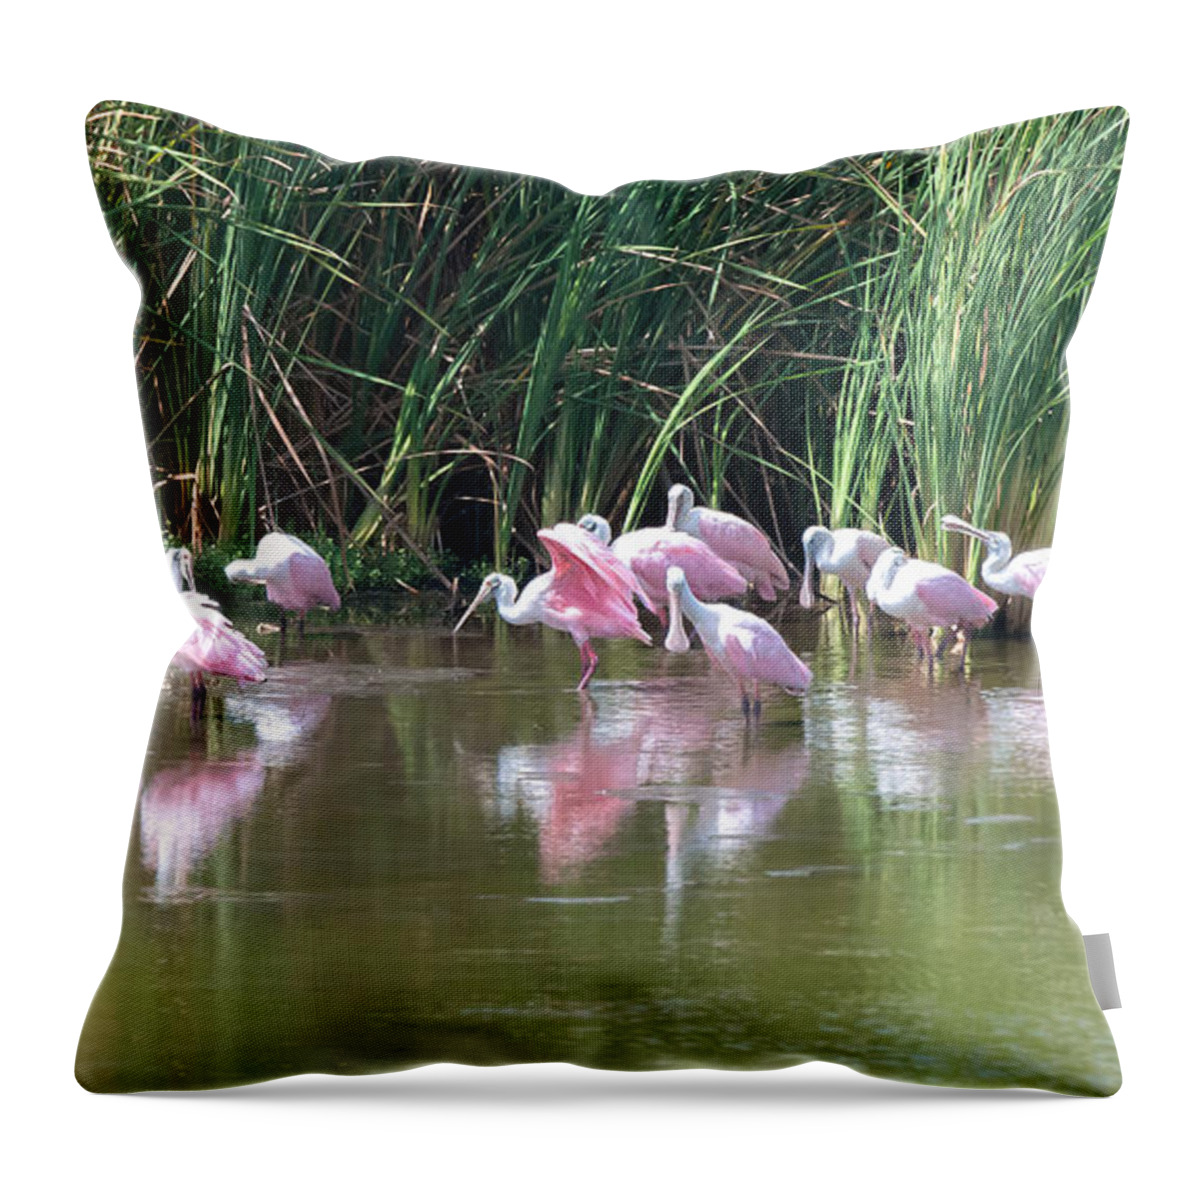 Roseate Spoonbill Throw Pillow featuring the photograph Roseate Spoonbills by Maria Nesbit